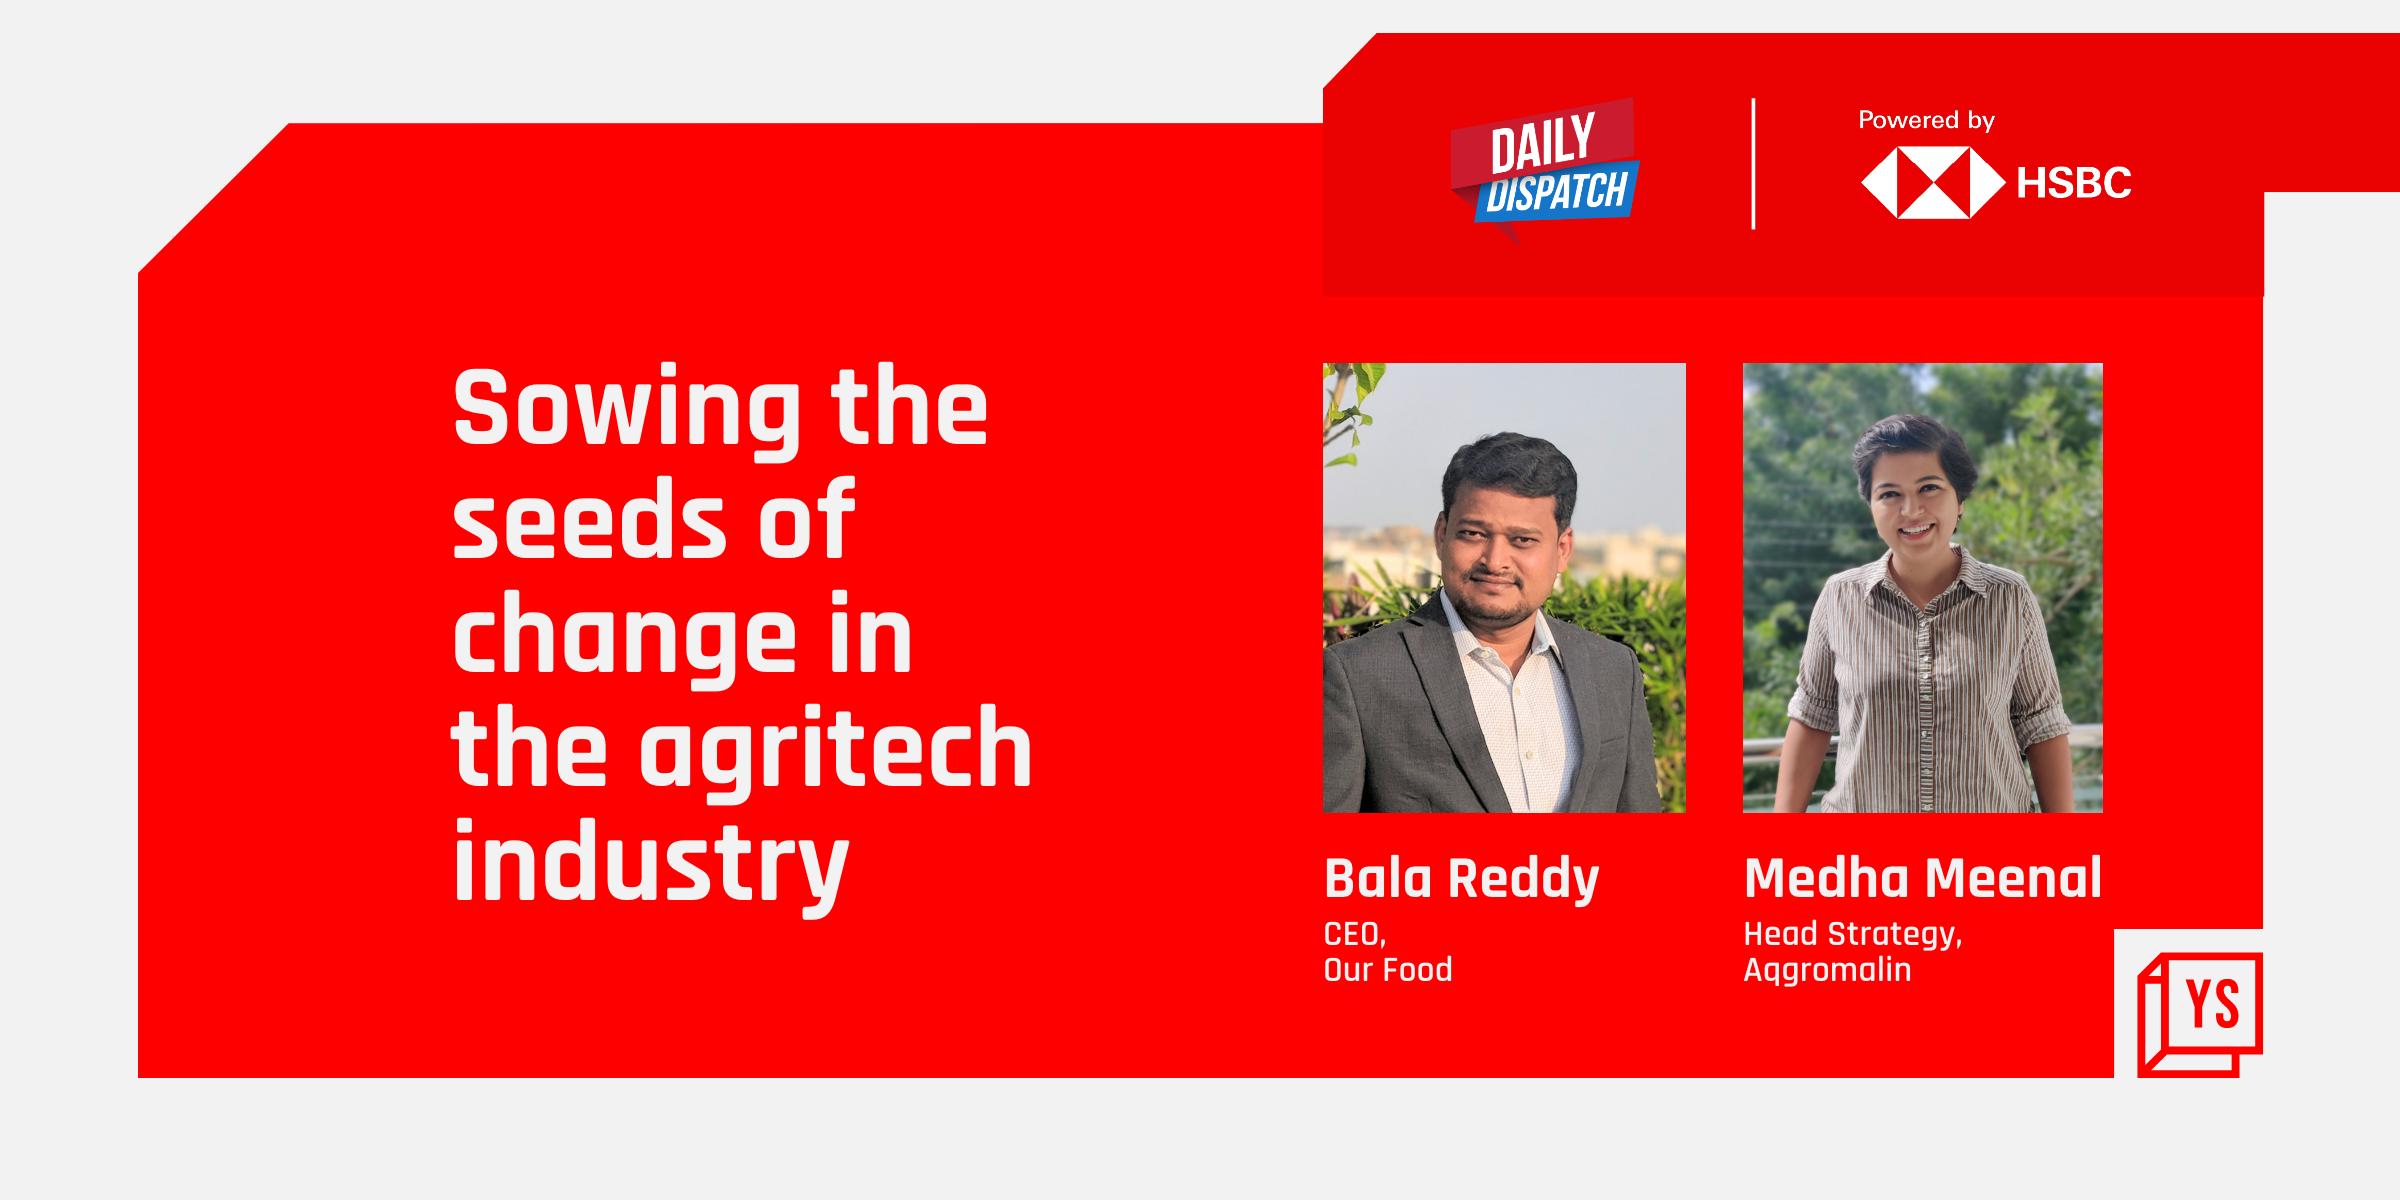 Post pandemic, India’s agritech industry is on course to a bright future 